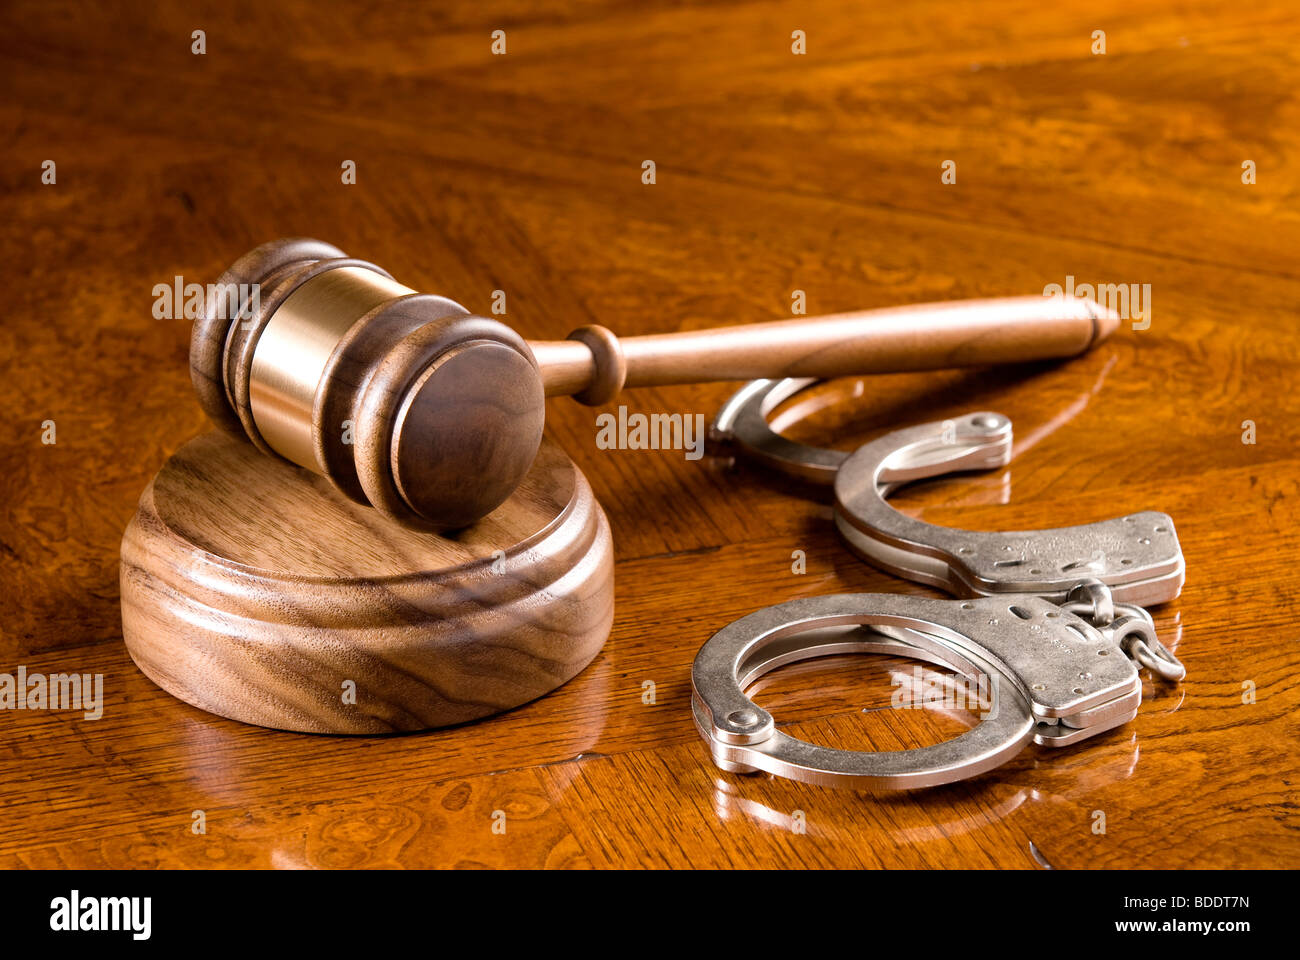 A gavel and block on a richly colored cherry wooden desk with handcuffs. Stock Photo